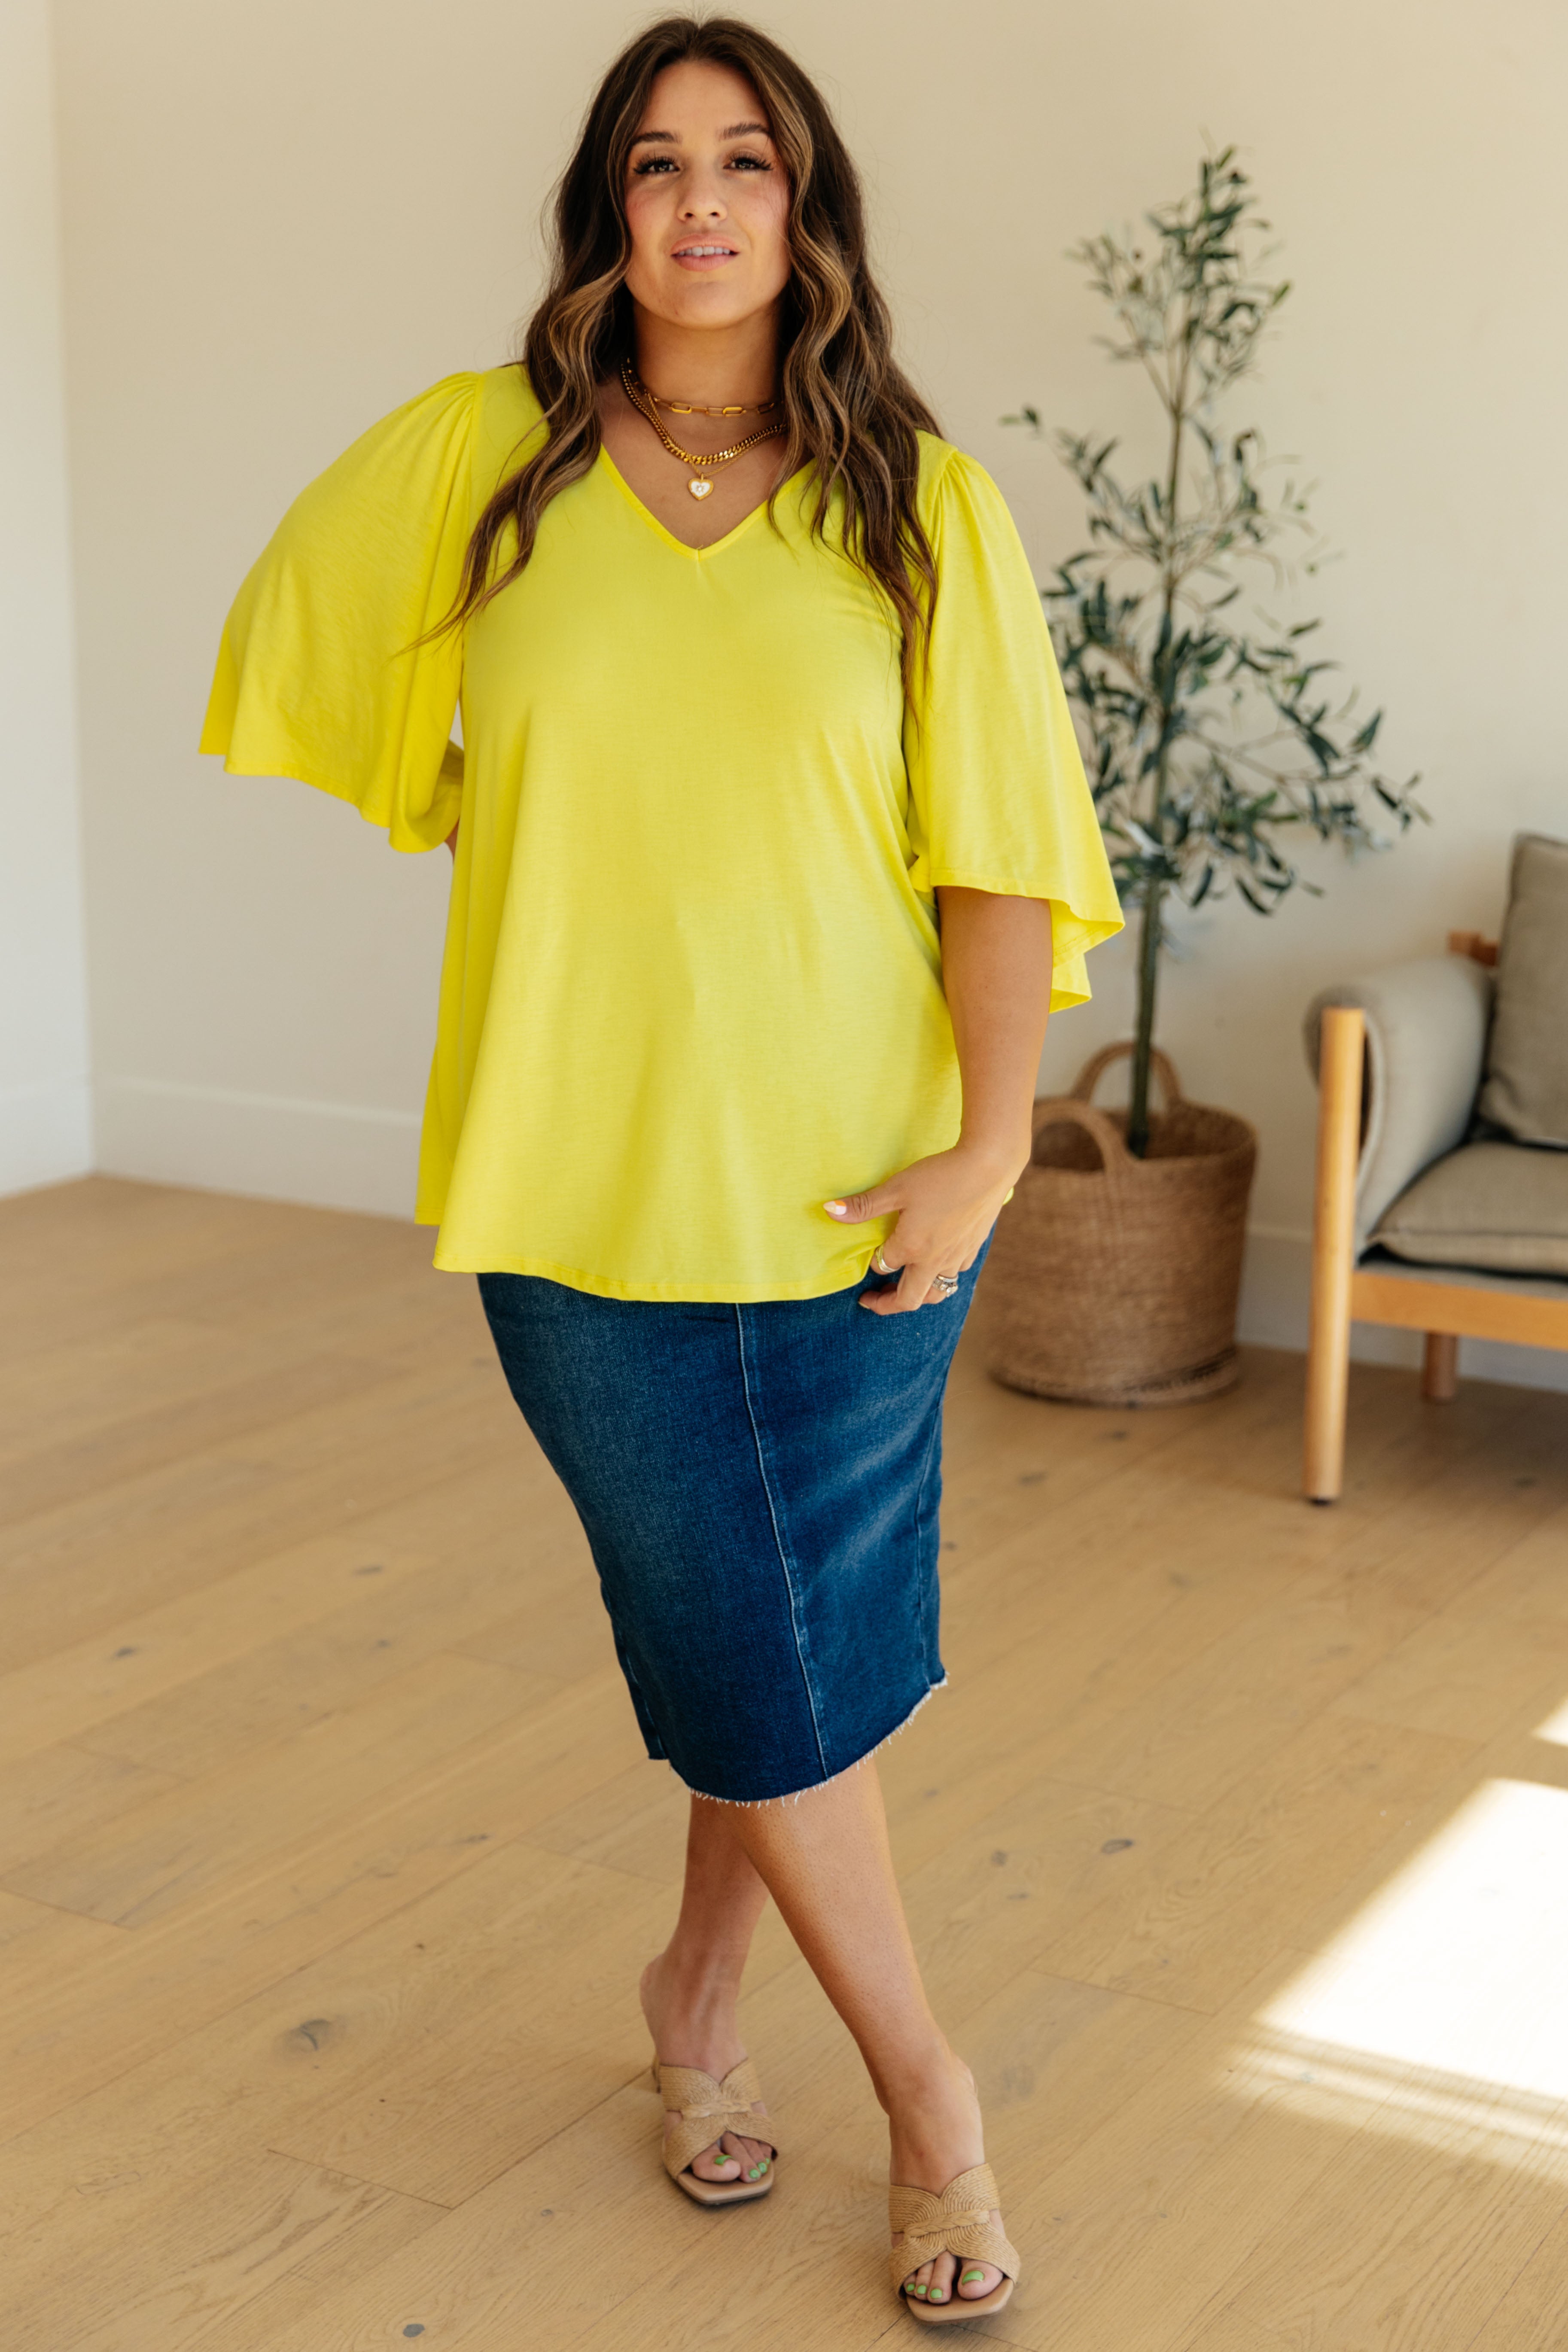 Cali Wrinkle Free Blouse in Neon Yellow